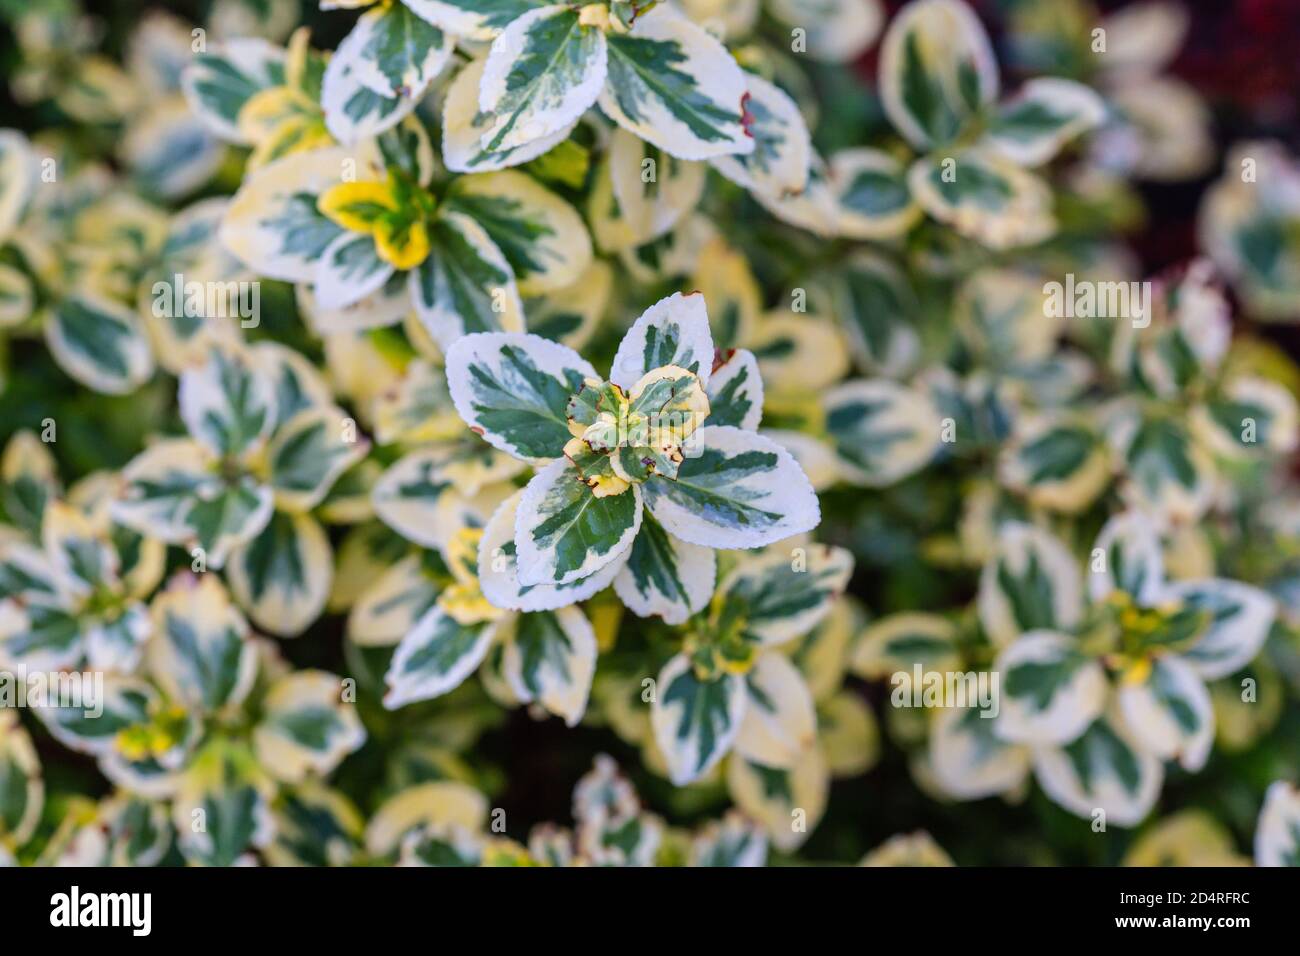 Top view of a Euonymus Japonicus plant leaves Stock Photo